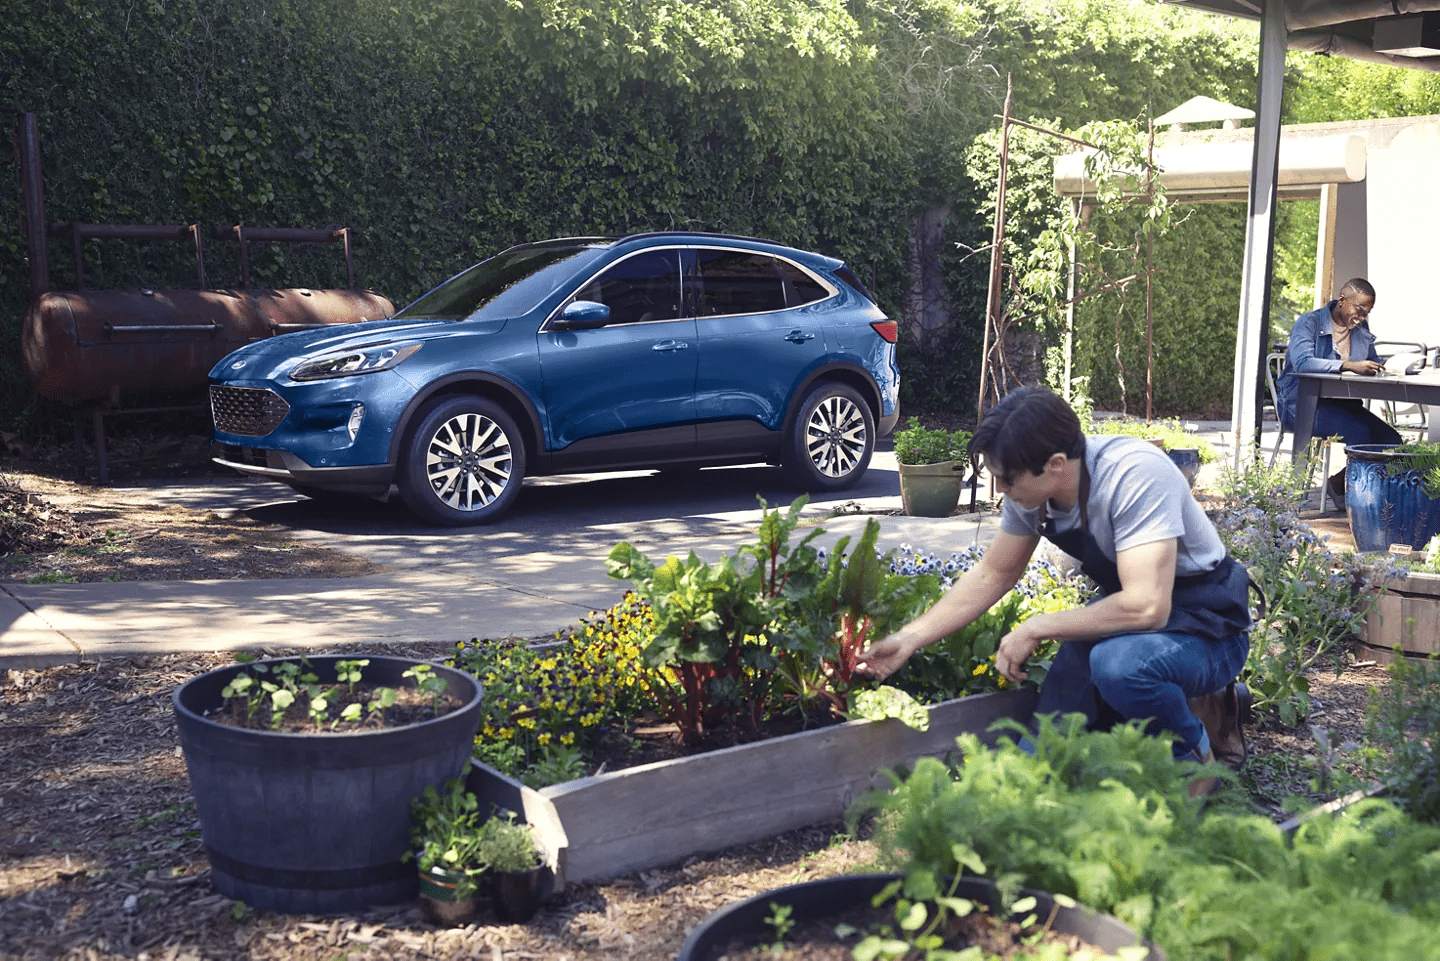 A blue 2022 Ford Escape parked while a family gardens